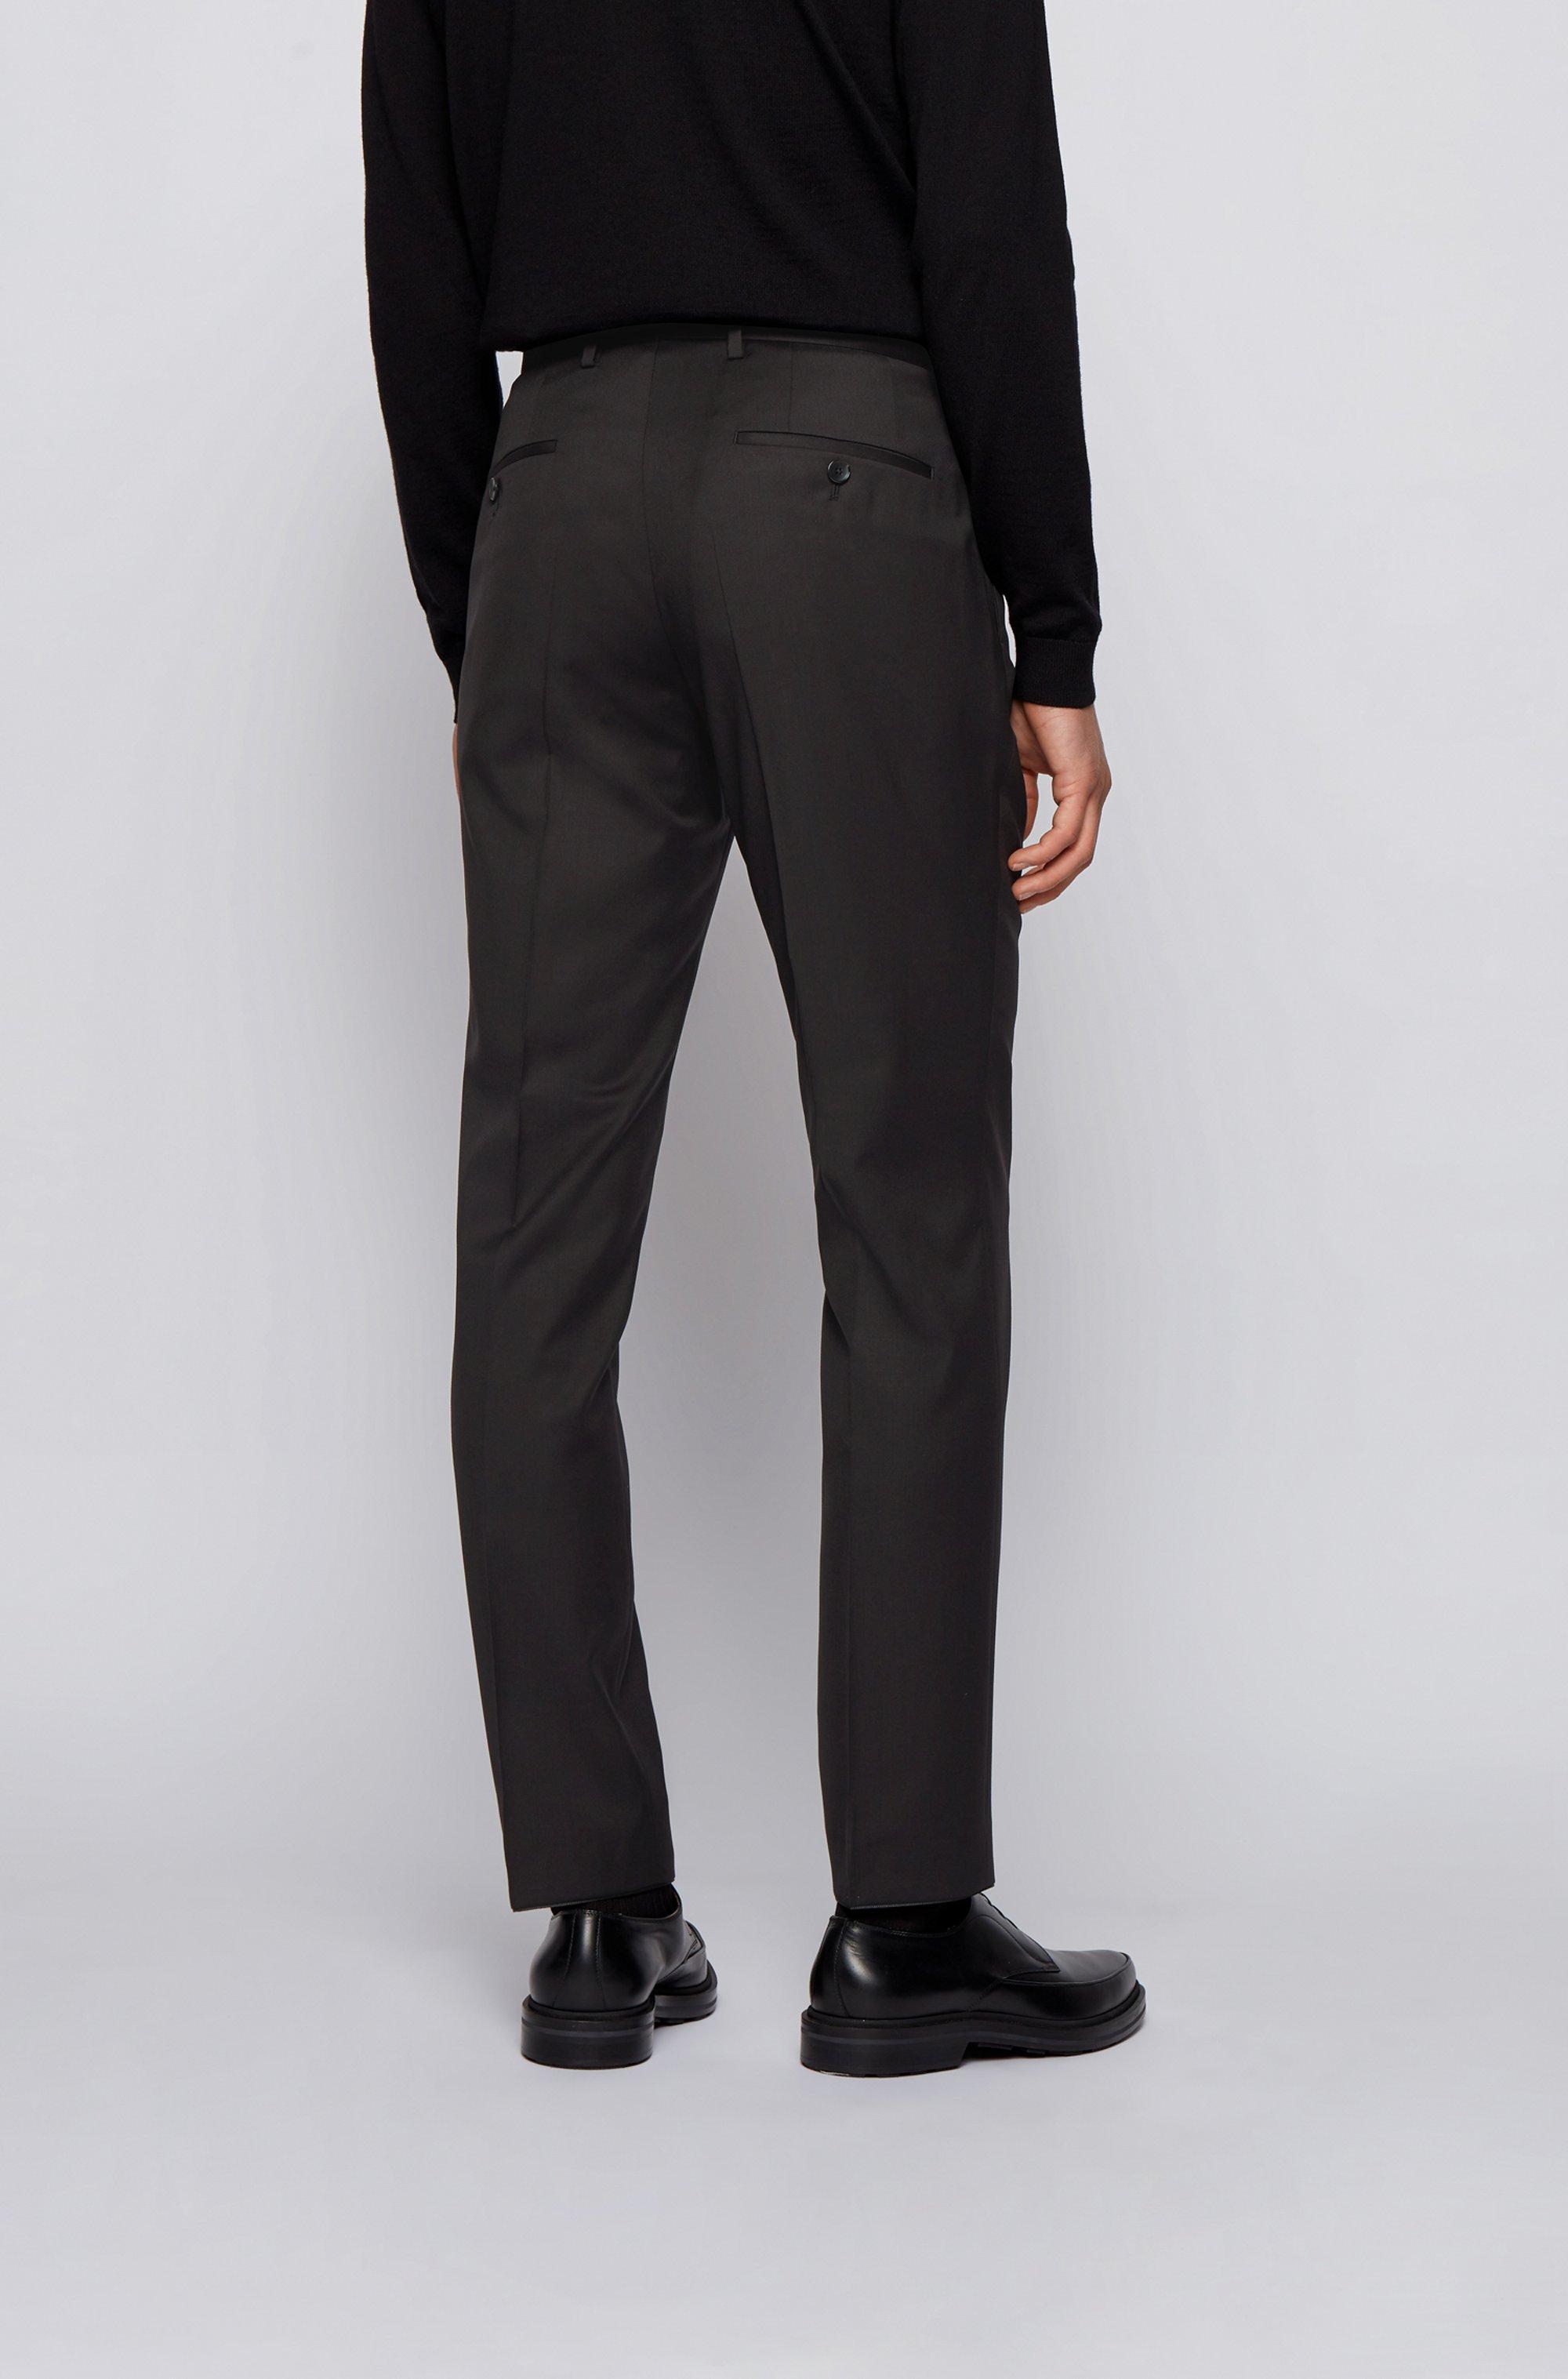 BOSS by HUGO BOSS Gibson Cyl Flat Front Solid Slim Fit Wool Dress Pants in  Black for Men - Lyst